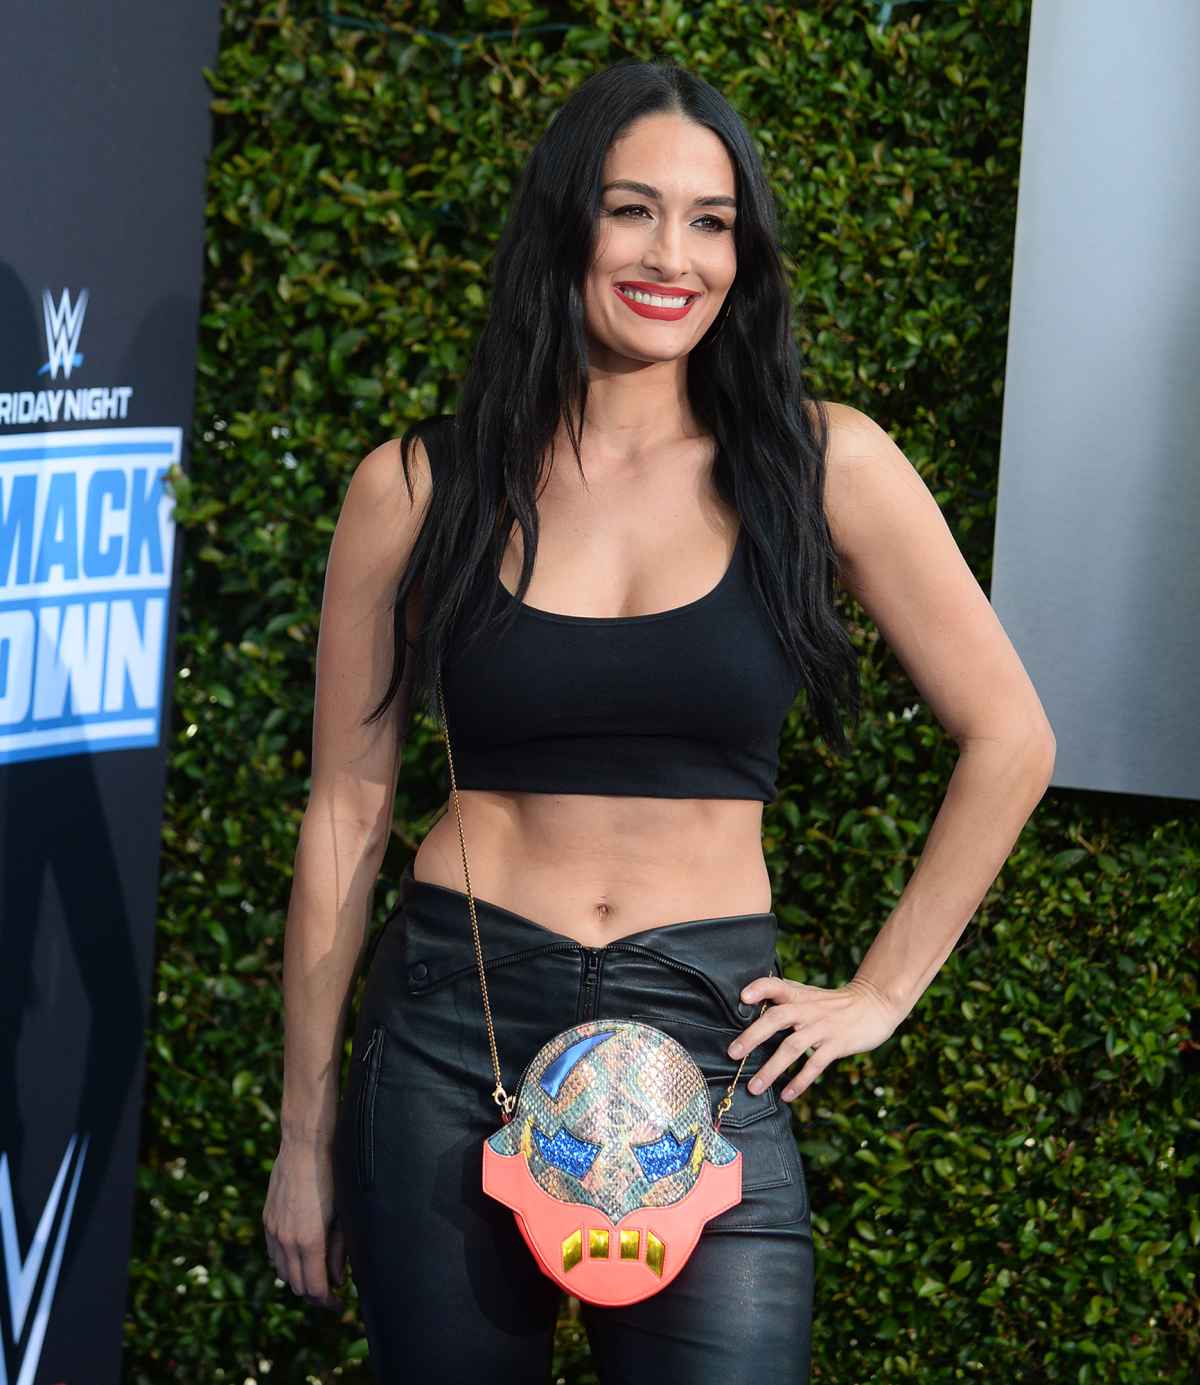 Nikki Bella Video Hd Pron - Celebrities Share Sex Confessions Over the Years